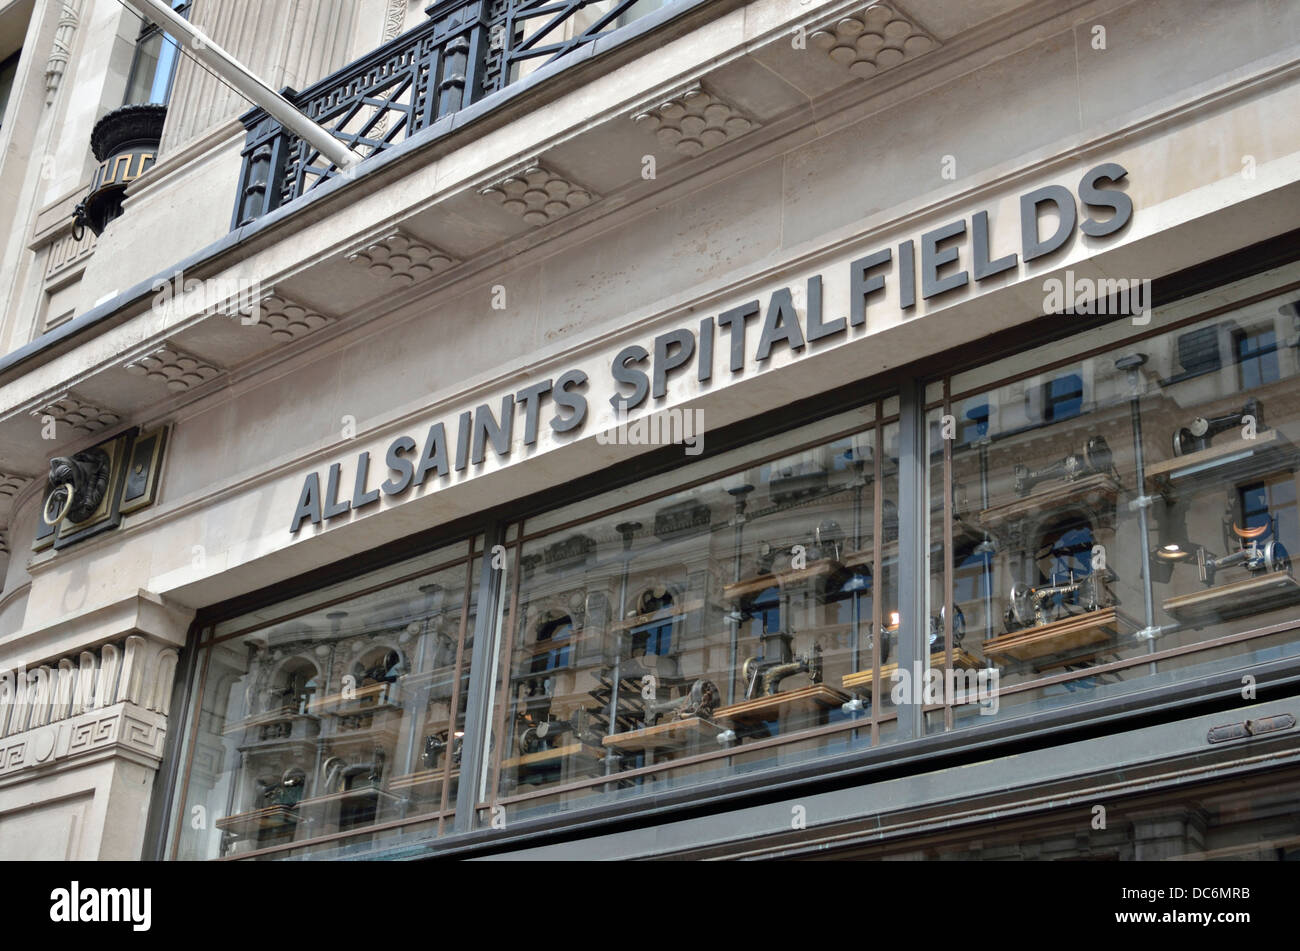 All saints spitalfields hi-res stock photography and images - Alamy